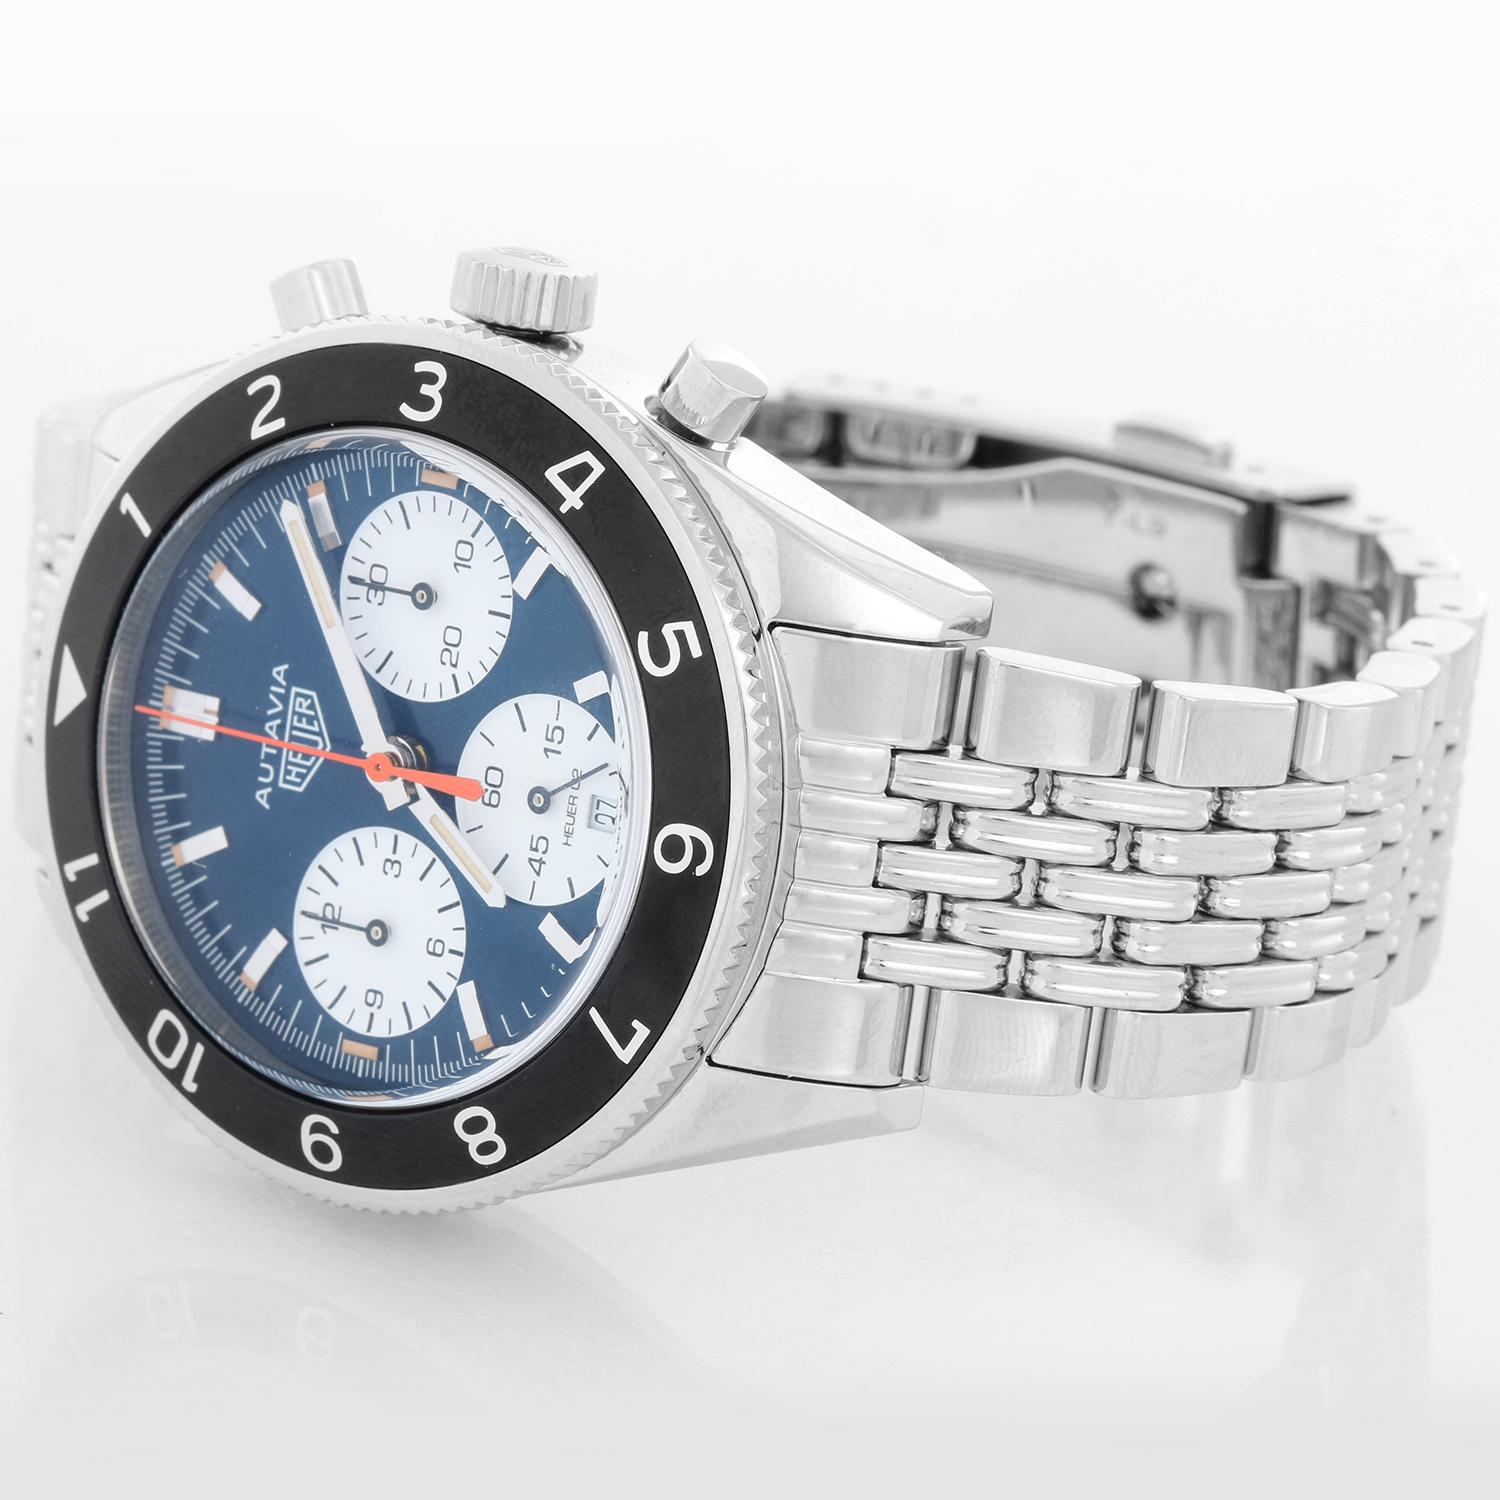 TAG Heuer Autavia Limited Edition Watches of Switzerland Mens Watch - Automatic Chronograph with Date. Stainless Steel case with black aluminum bezel ( 42 mm ). Blue sunray dial with date window at 6 o'clock. 7 Row Grains of Rice bracelet; will fit